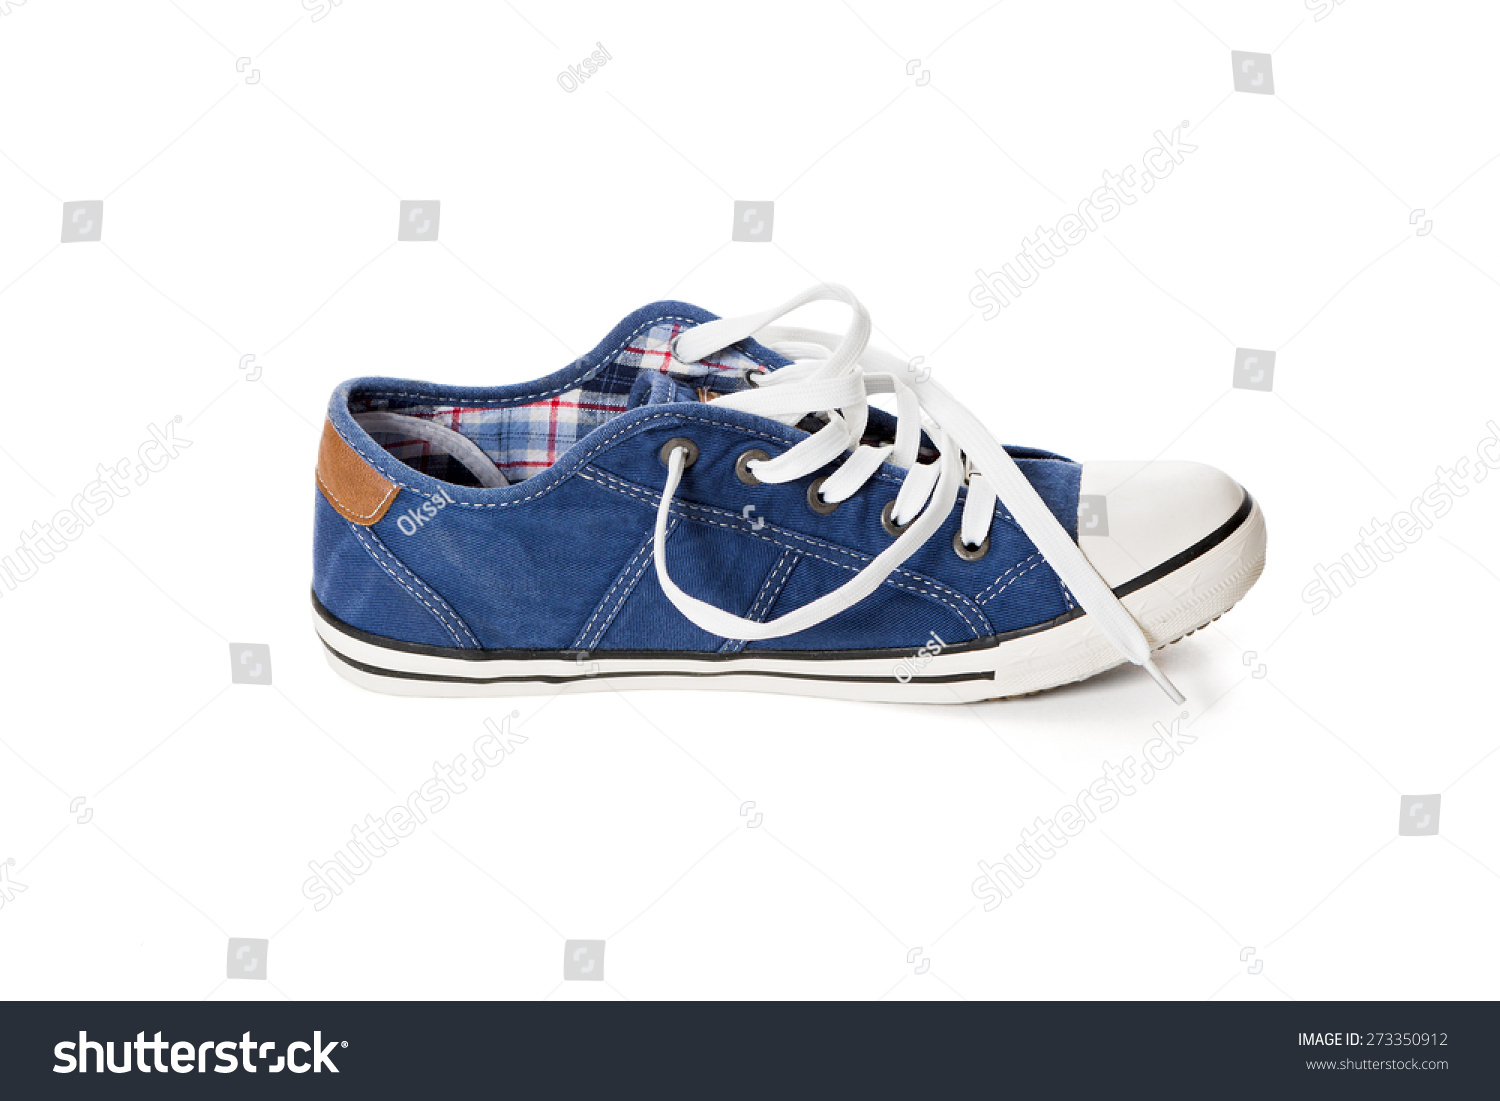 Side View Blue Athletic Shoe Untied Stock Photo 273350912 | Shutterstock